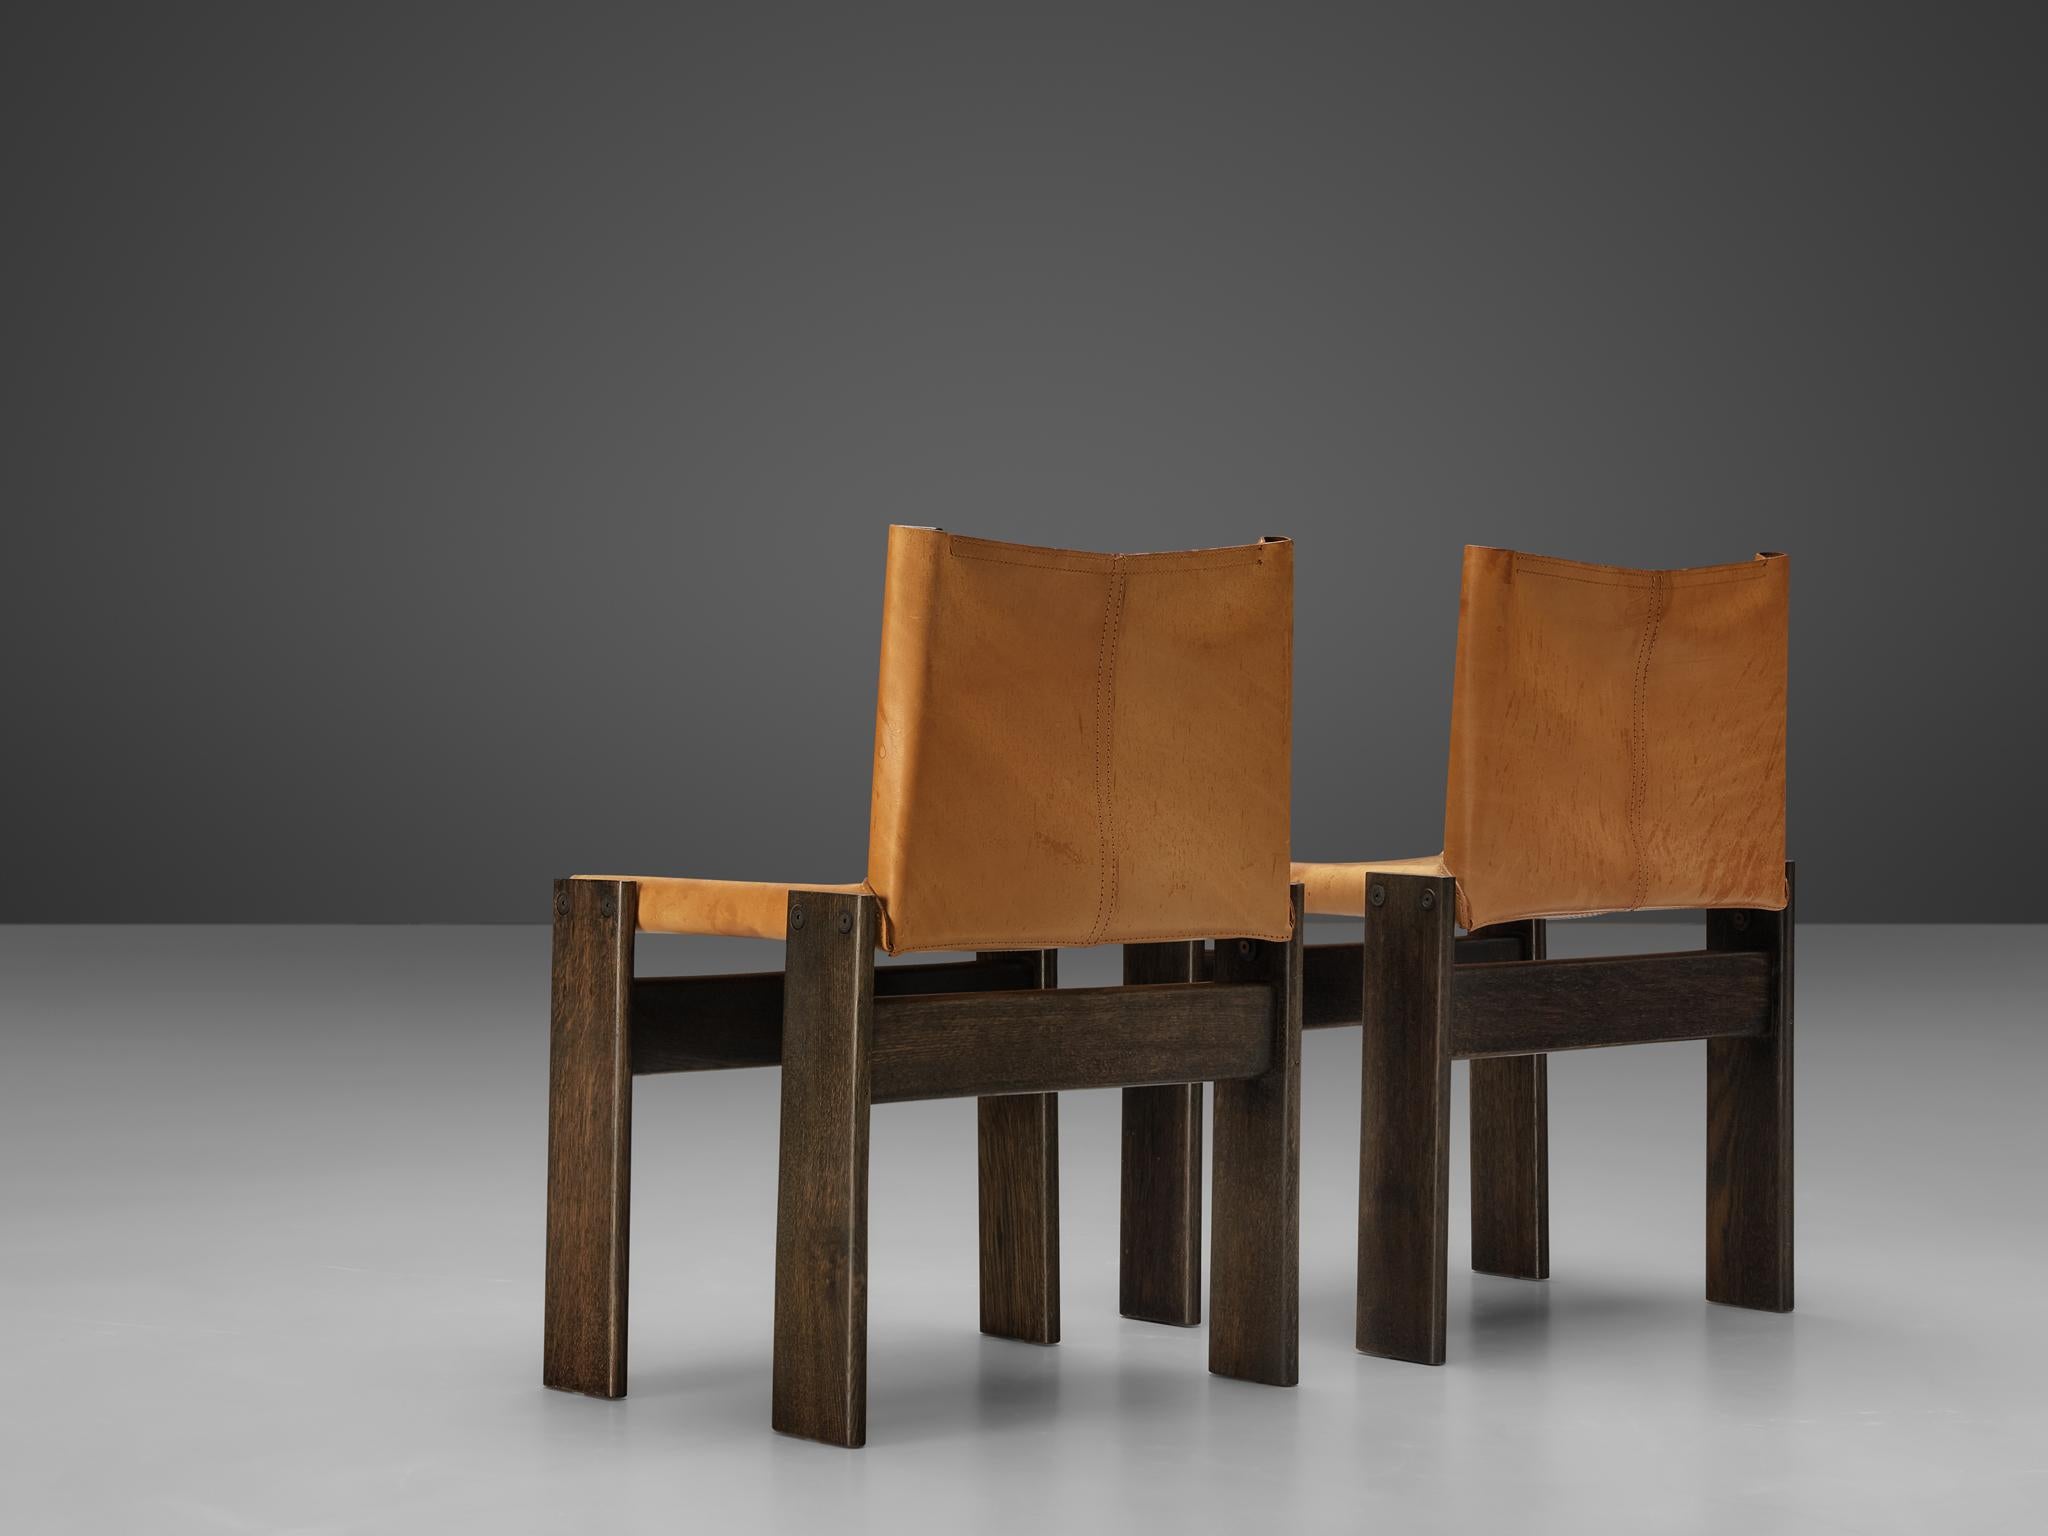 Afra & Tobia Scarpa 'Monk' Chairs in Cognac Leather 3